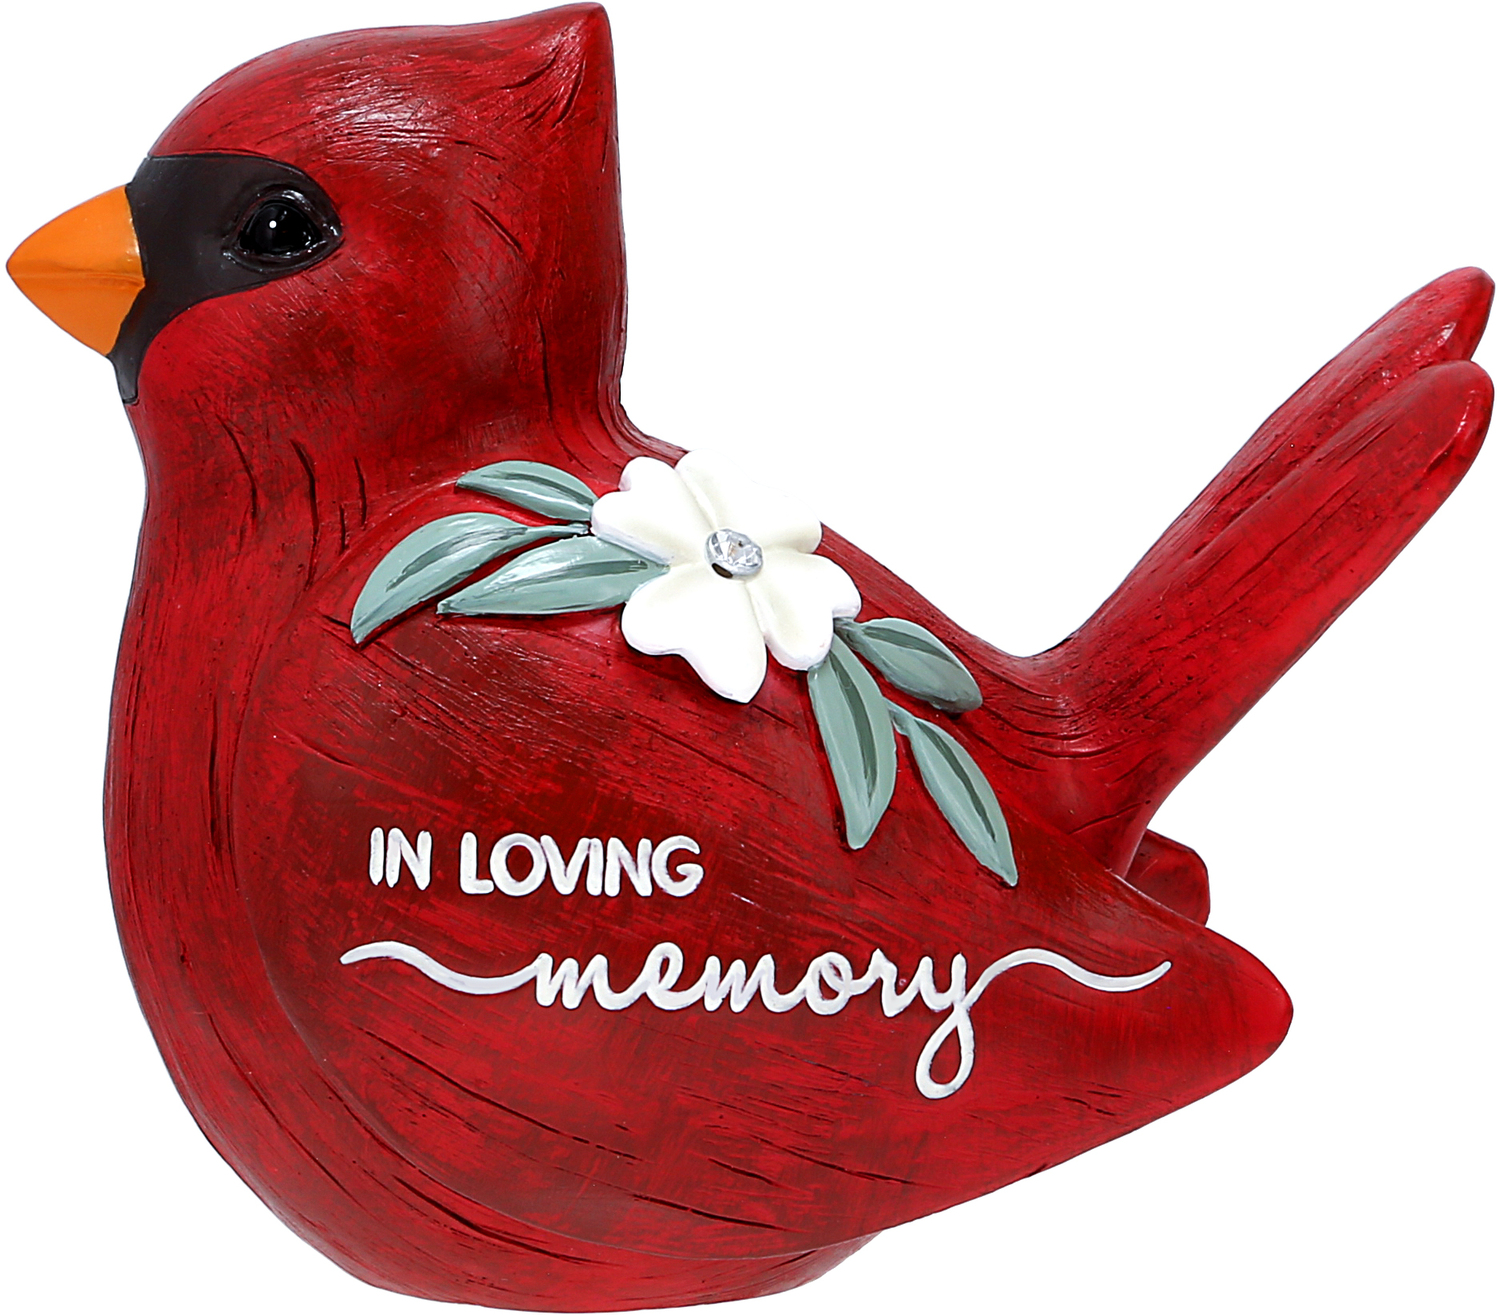 In Loving Memory by Always by Your Side - In Loving Memory - 3.75" Cardinal